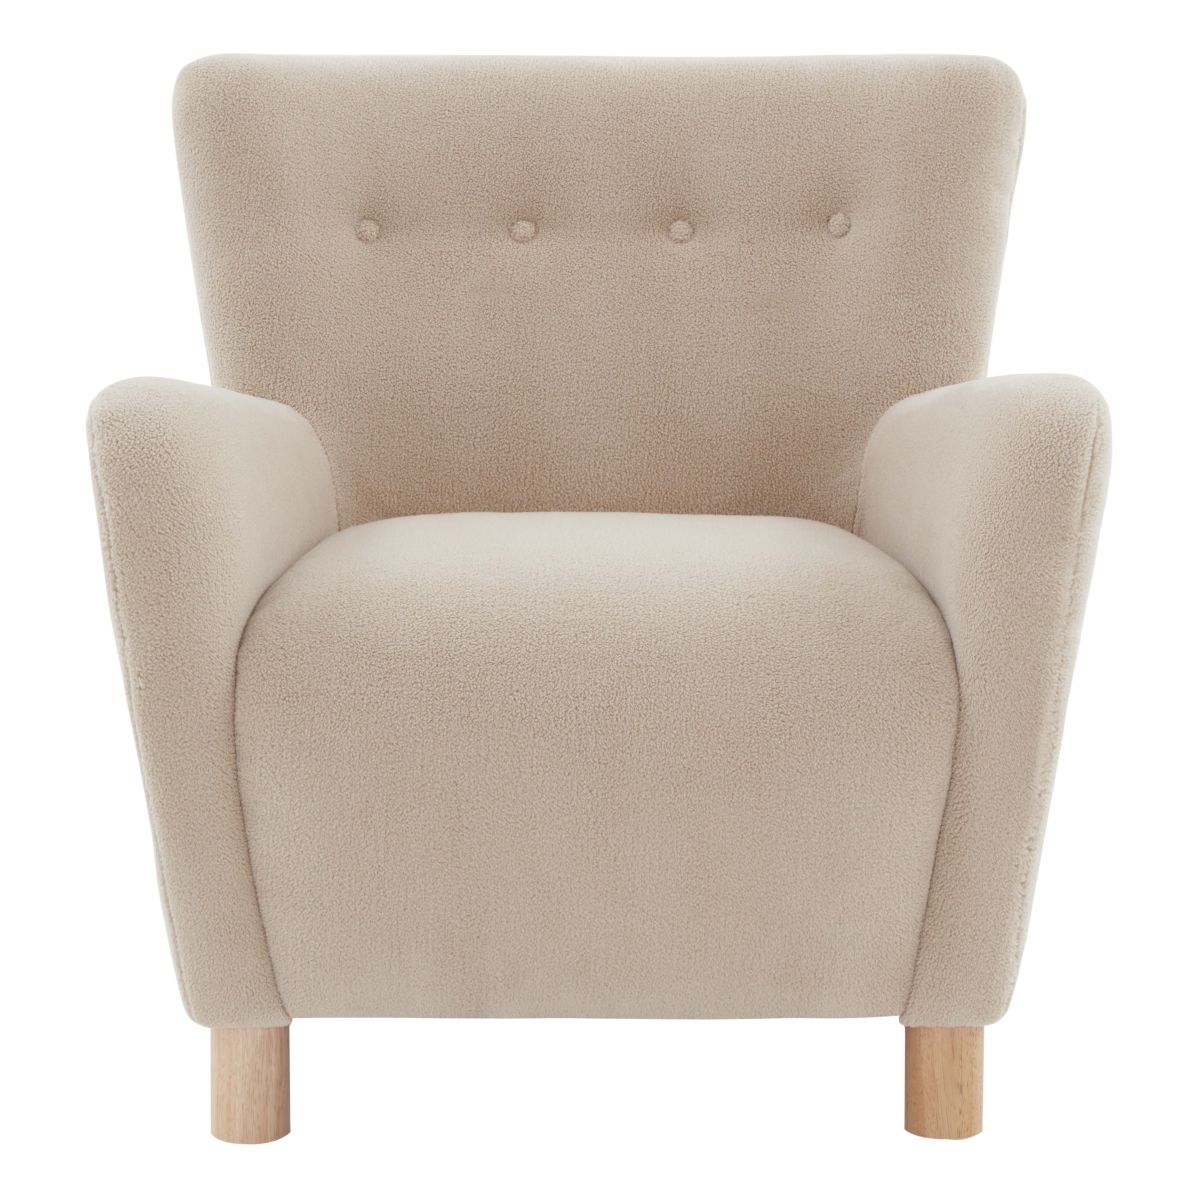 Safavieh Couture Carey Faux Shearling Accent Chair - Tan